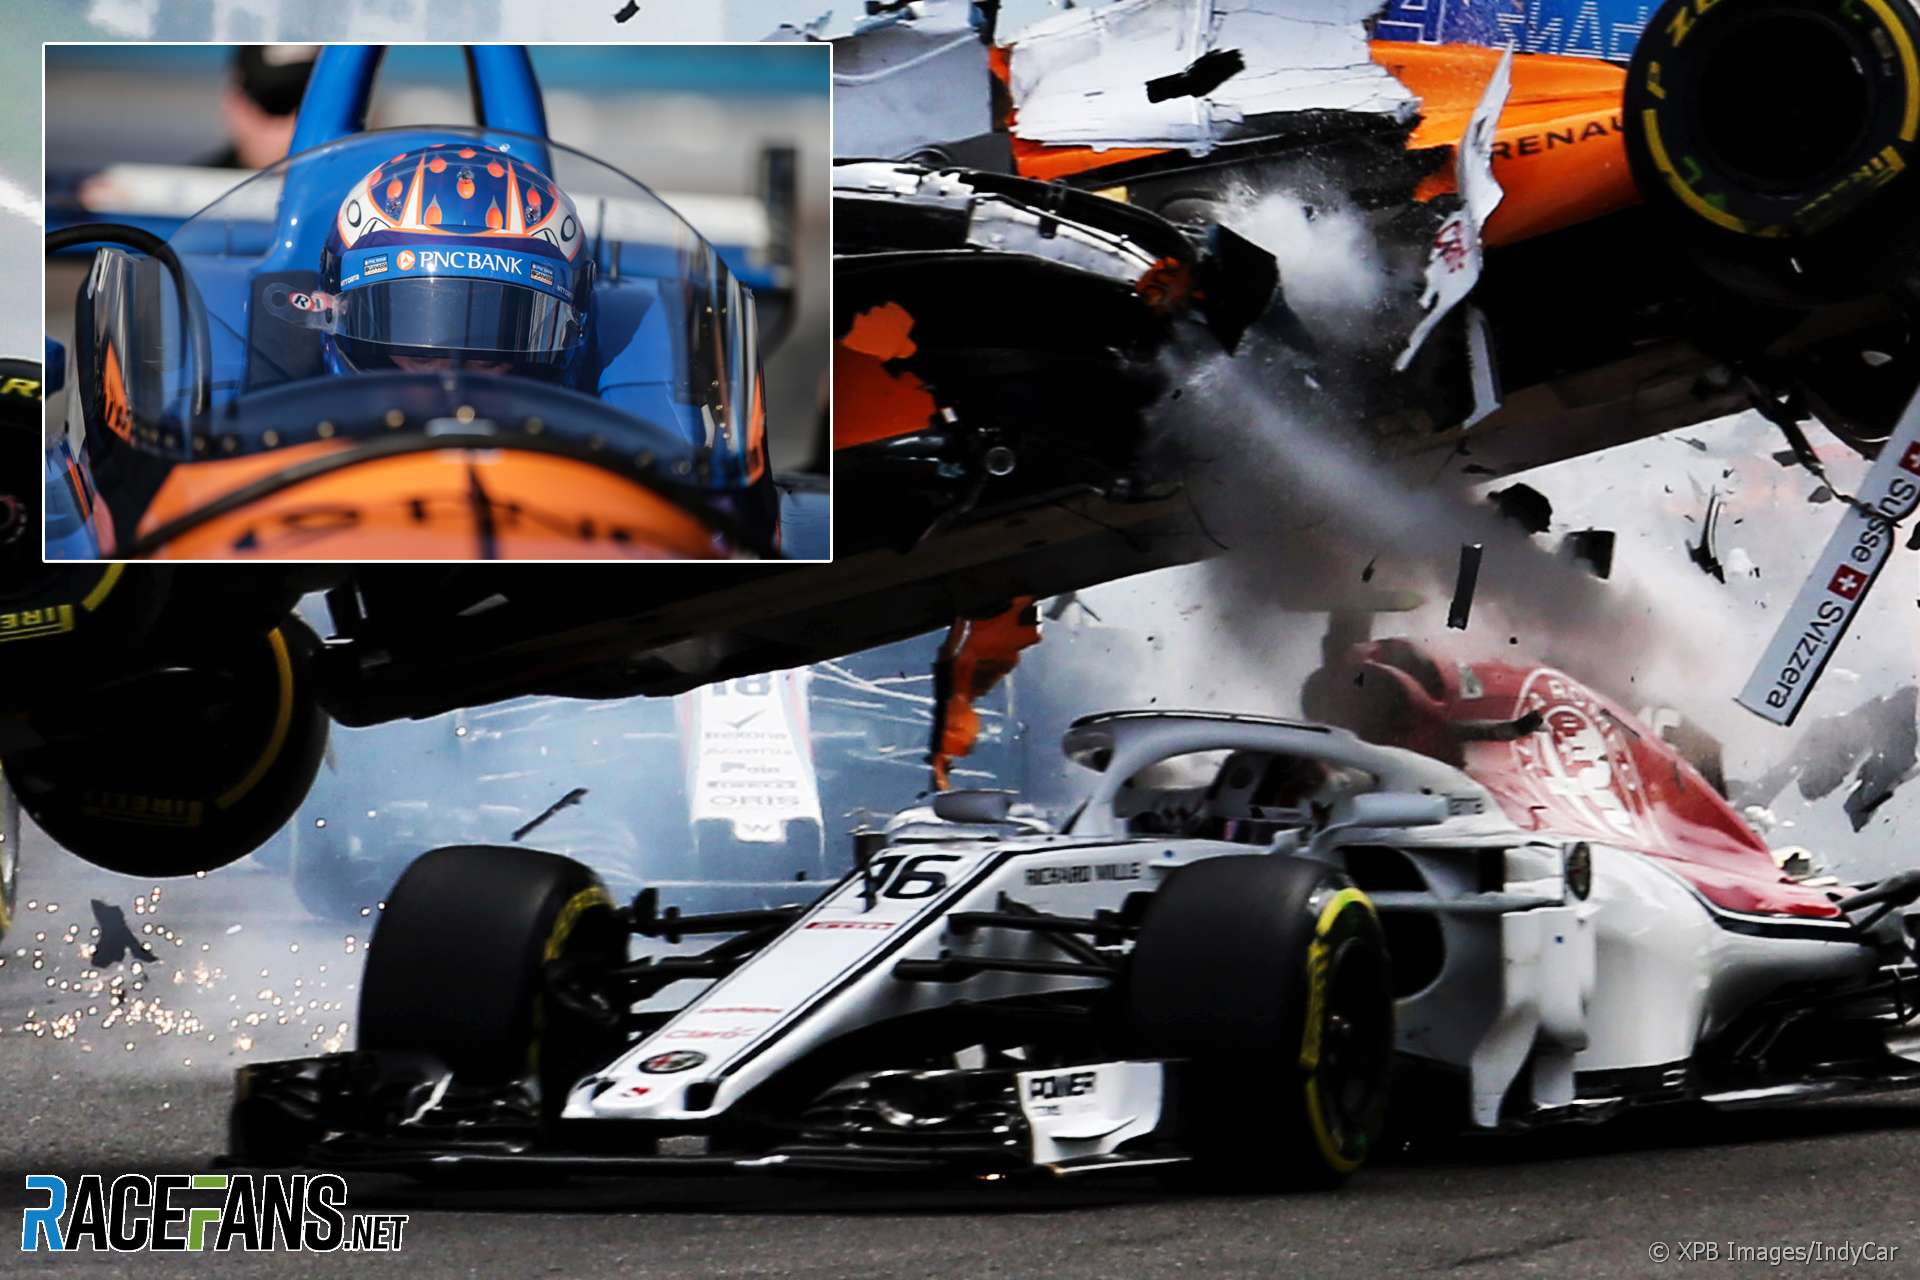 Composite image of Charles Leclerc's Spa 2018 crash and Scott Dixon testing IndyCar's windscreen